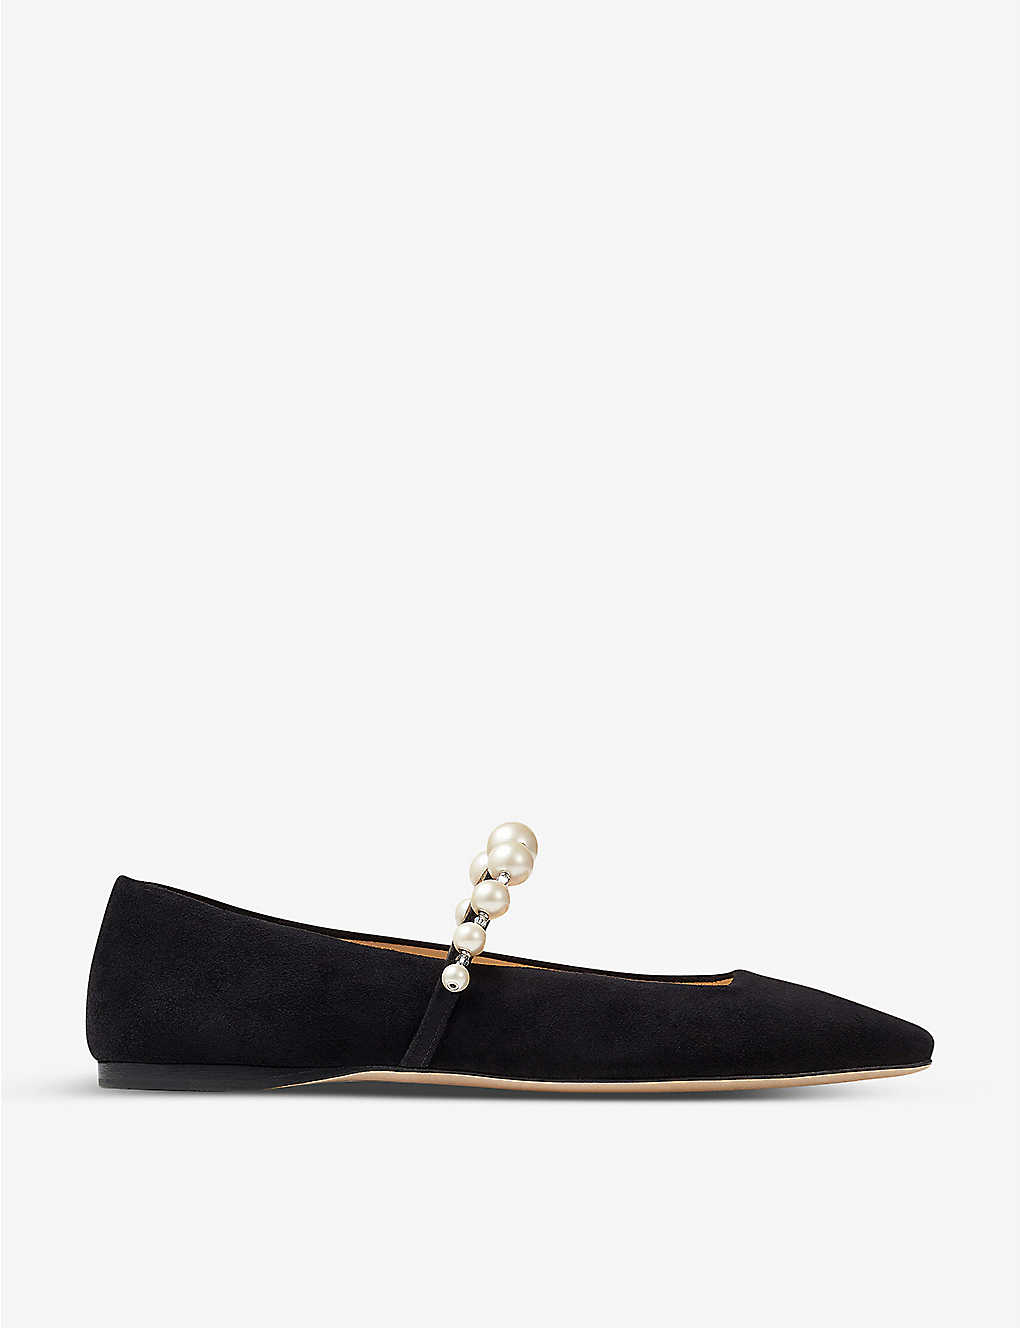 Shop Jimmy Choo Womens Black/white Ade Pearl And Crystal-embellished Suede Ballet Flats